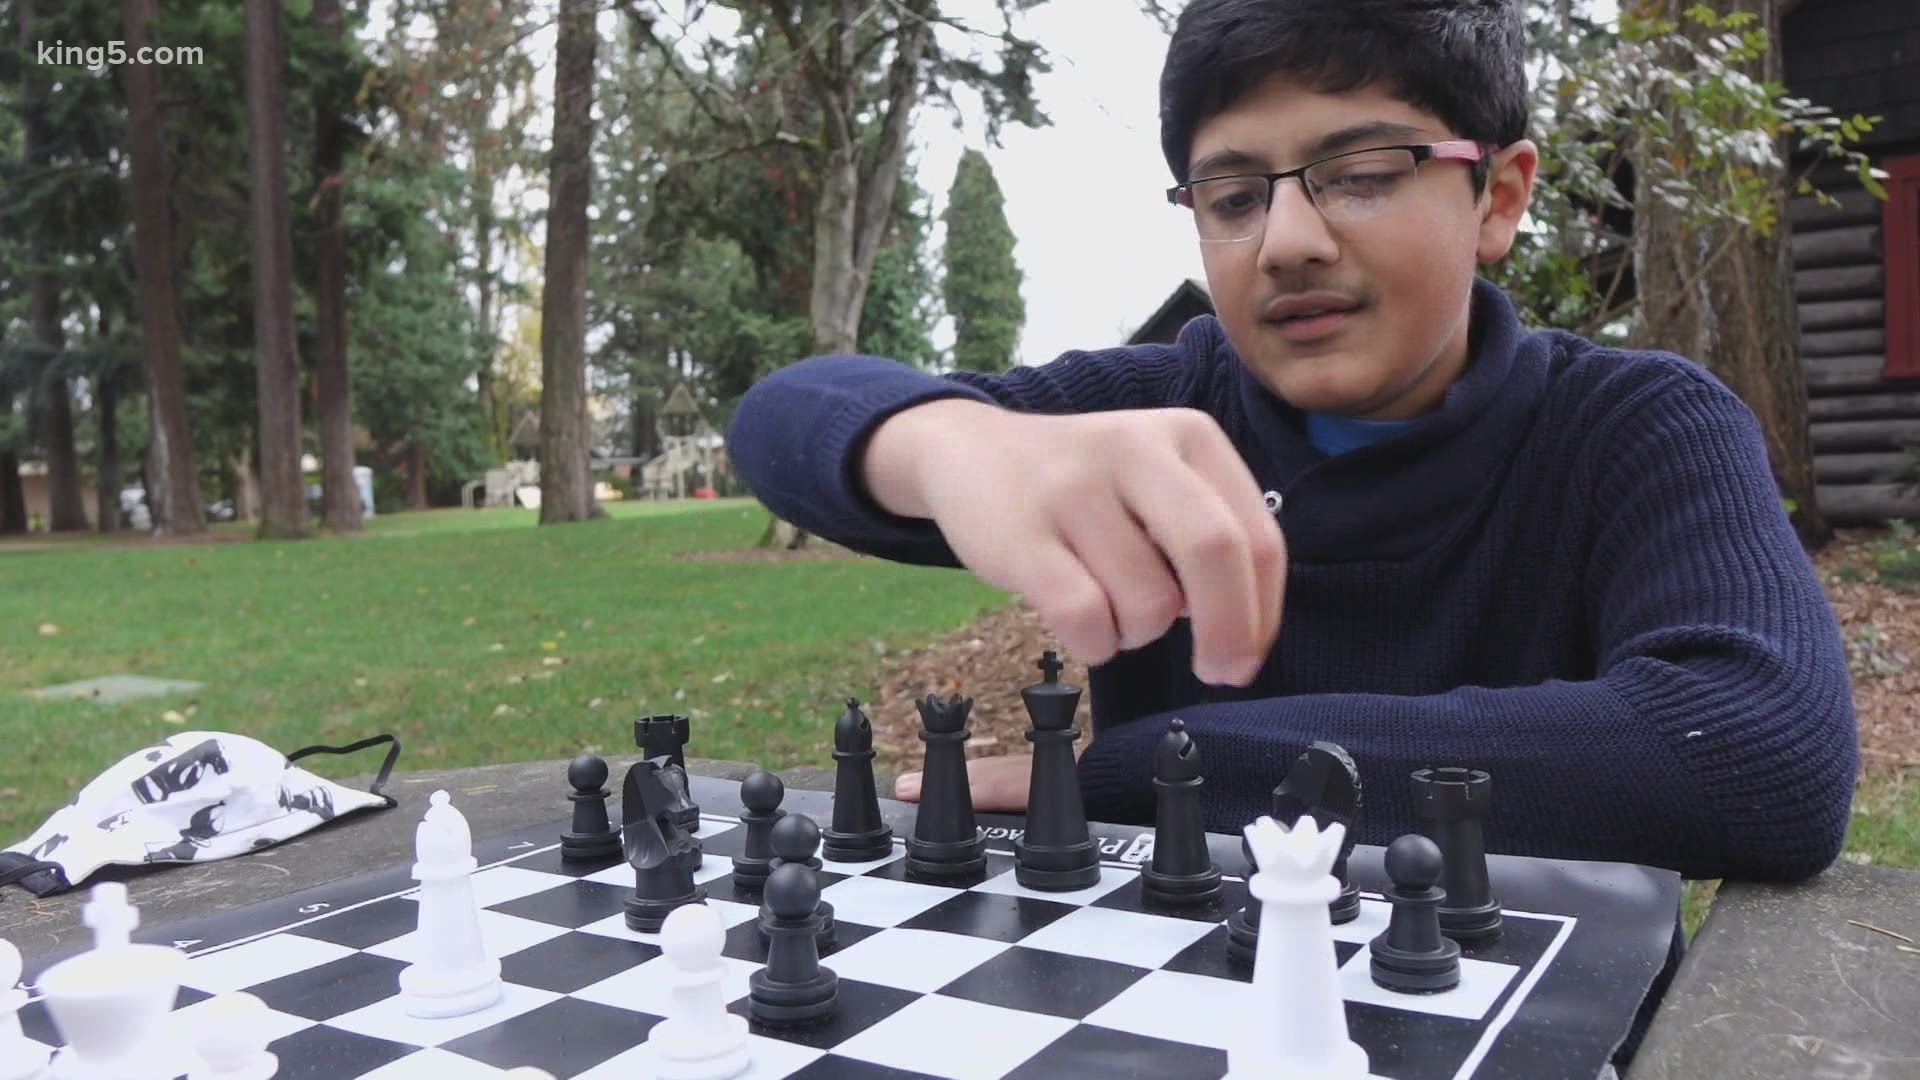 Washington state team crowned national chess champions